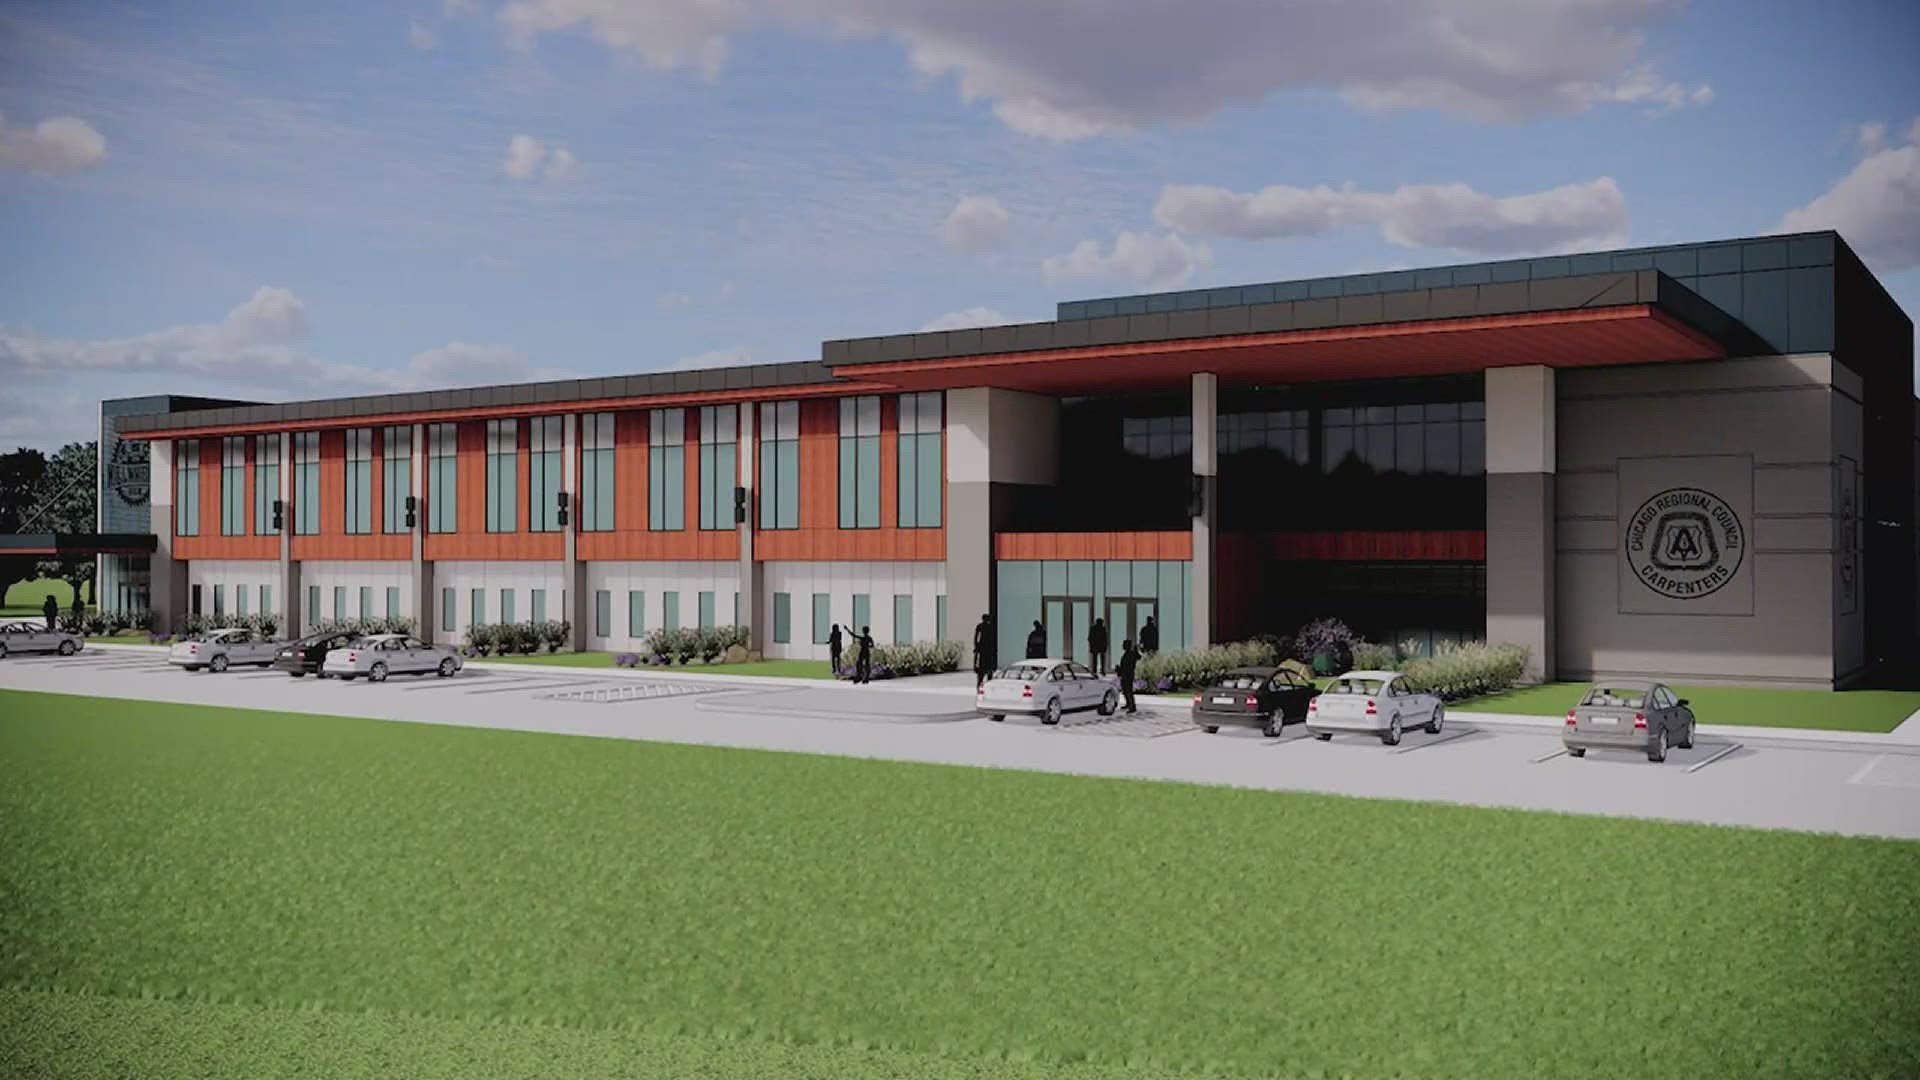 10m Training Center Coming For Union Carpenters Millwrights Wqad Com